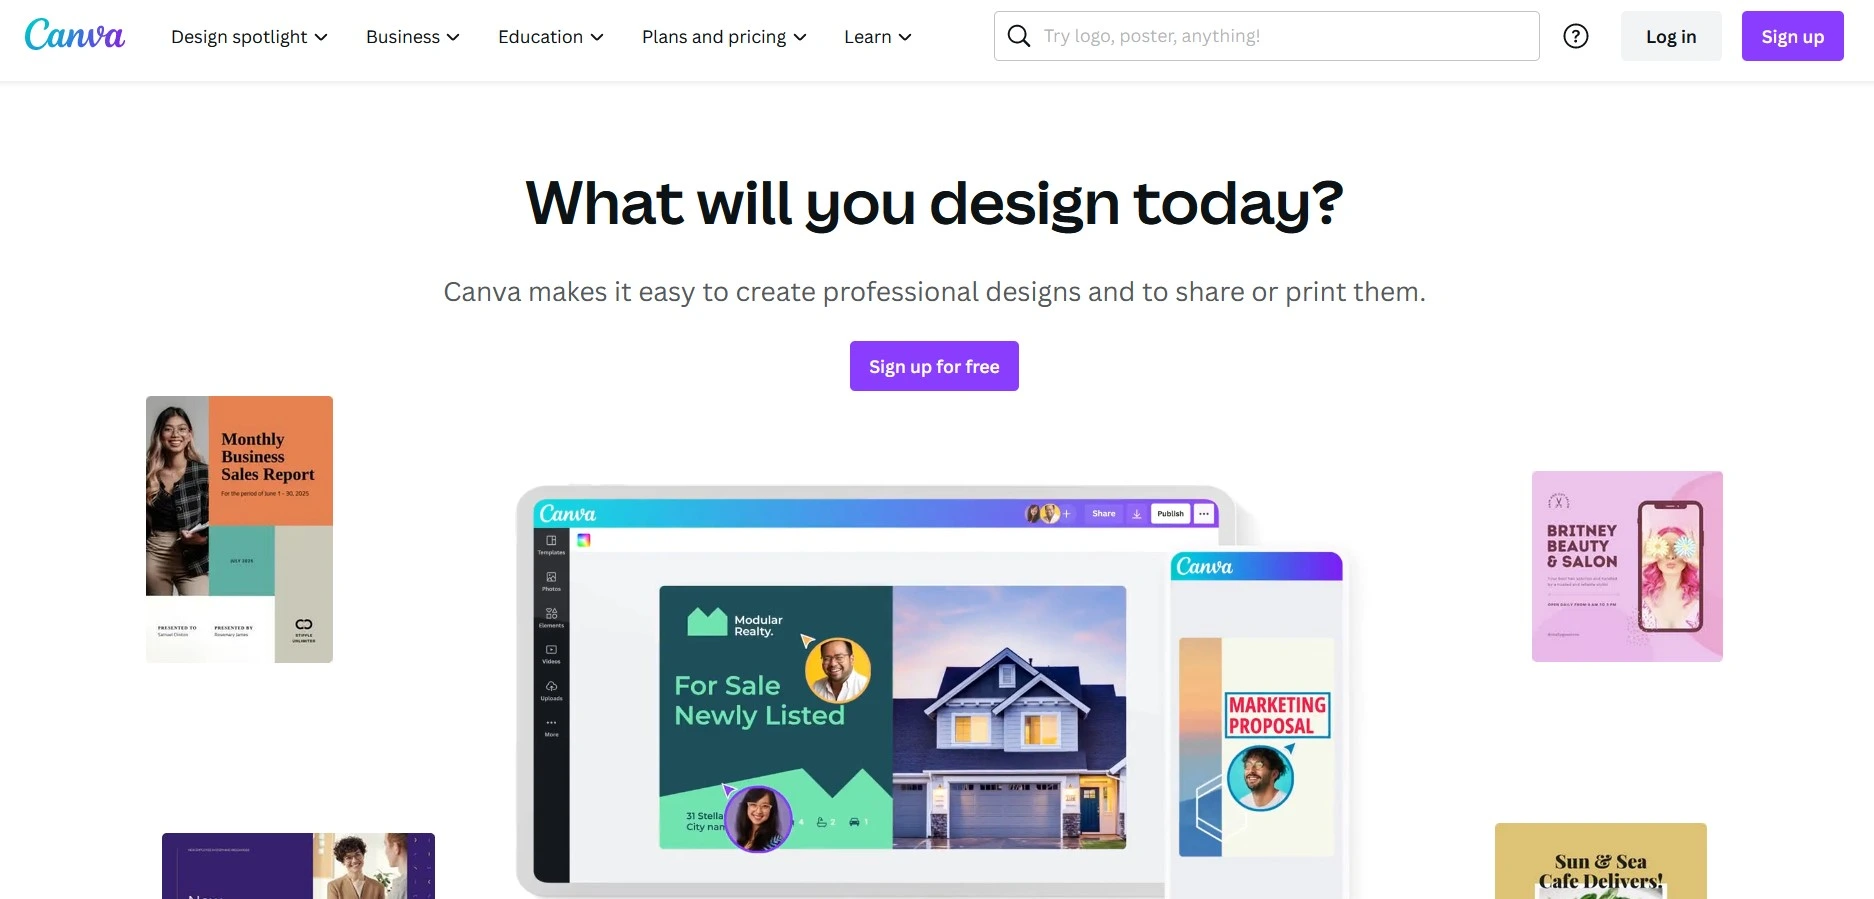 Canva lets you create professional designs